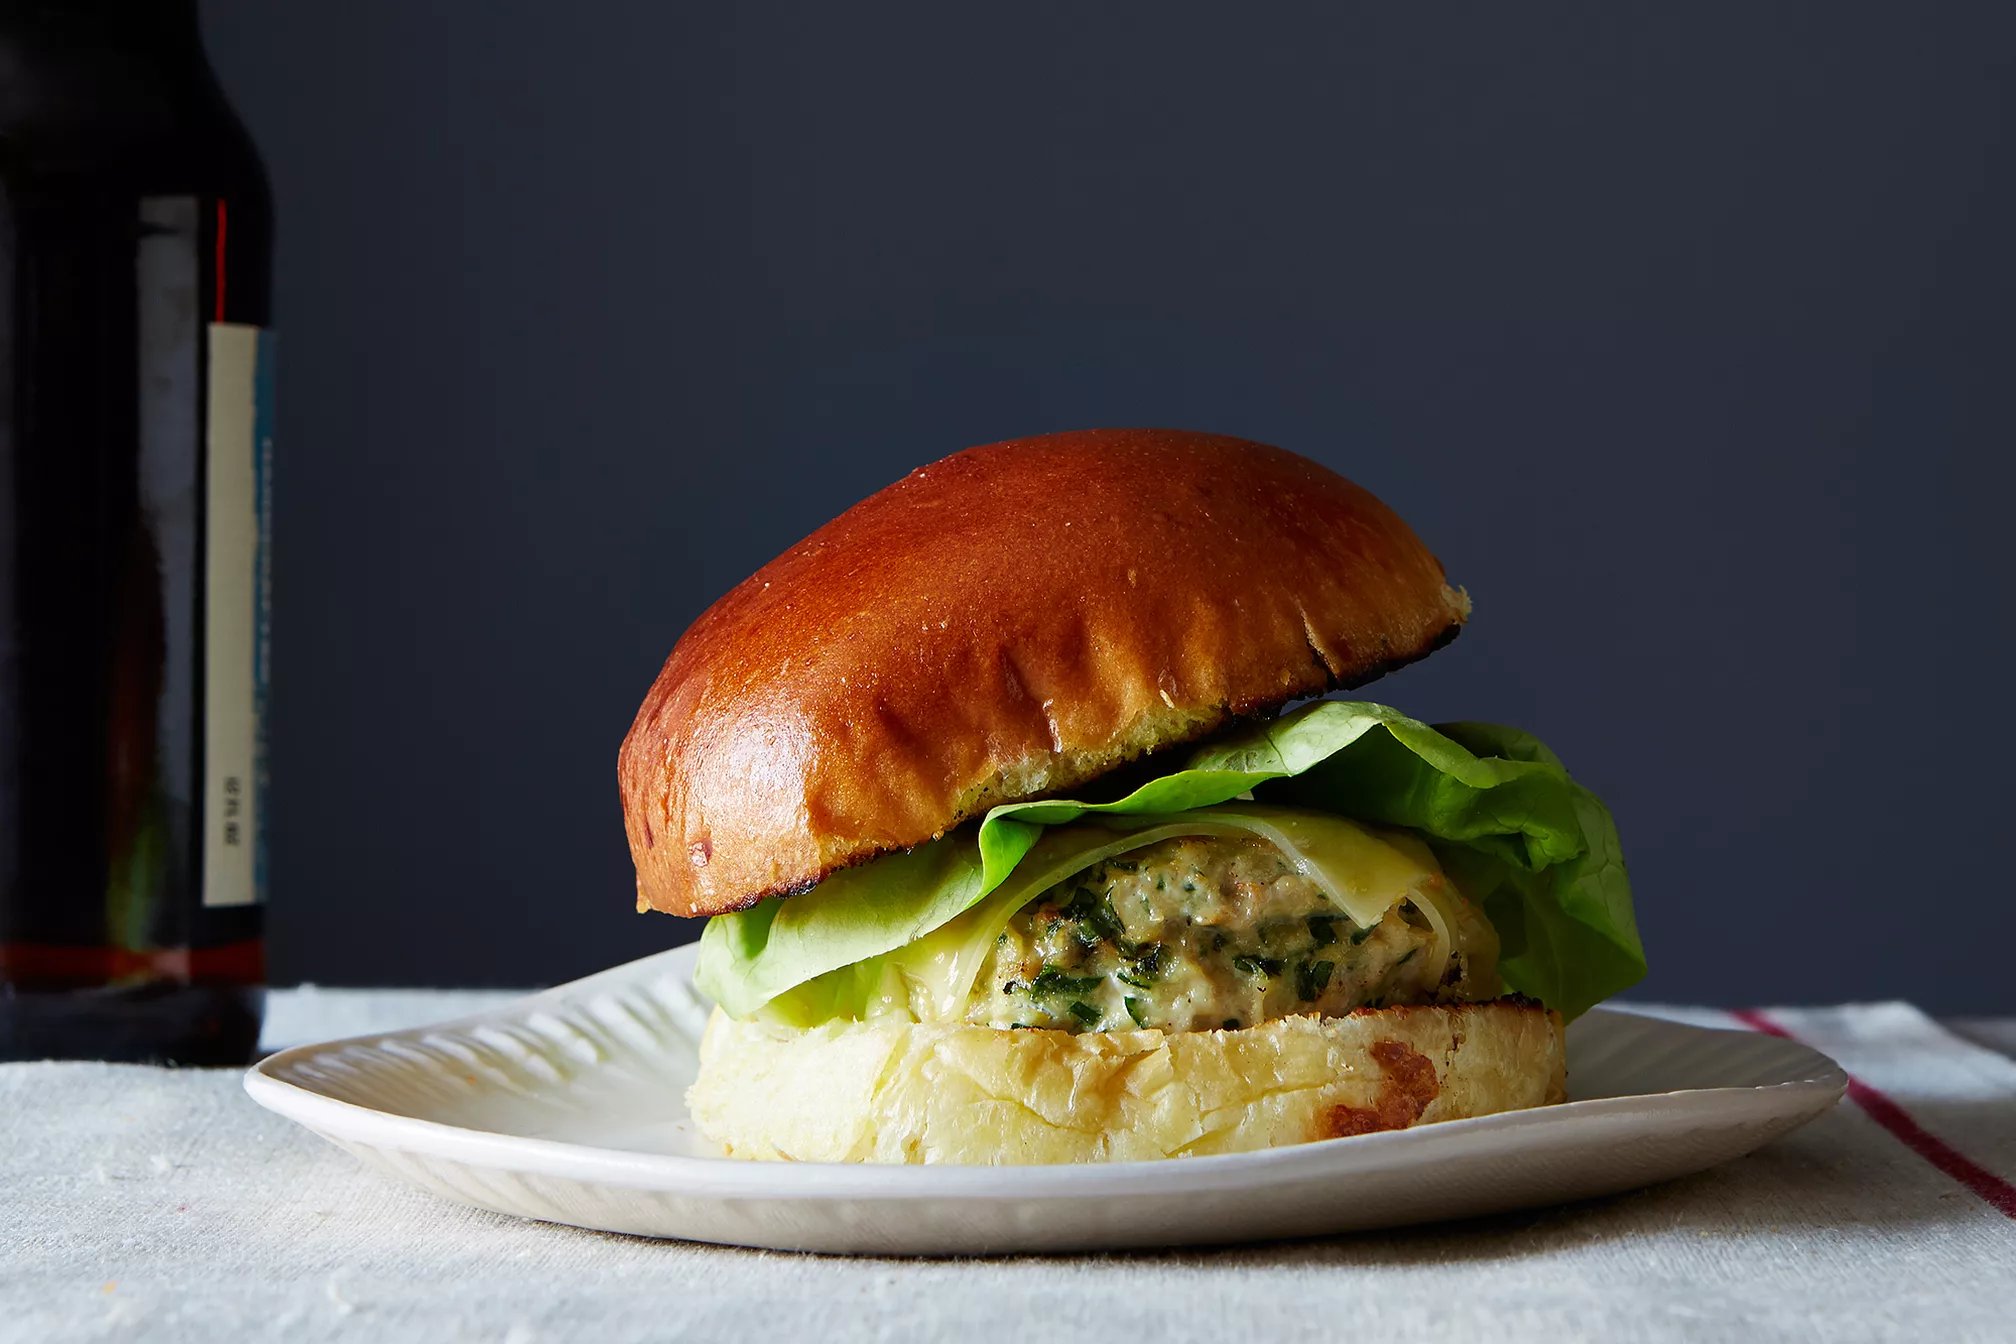 Herbed Chicken Burgers With Spicy Aioli Recipe On Food52